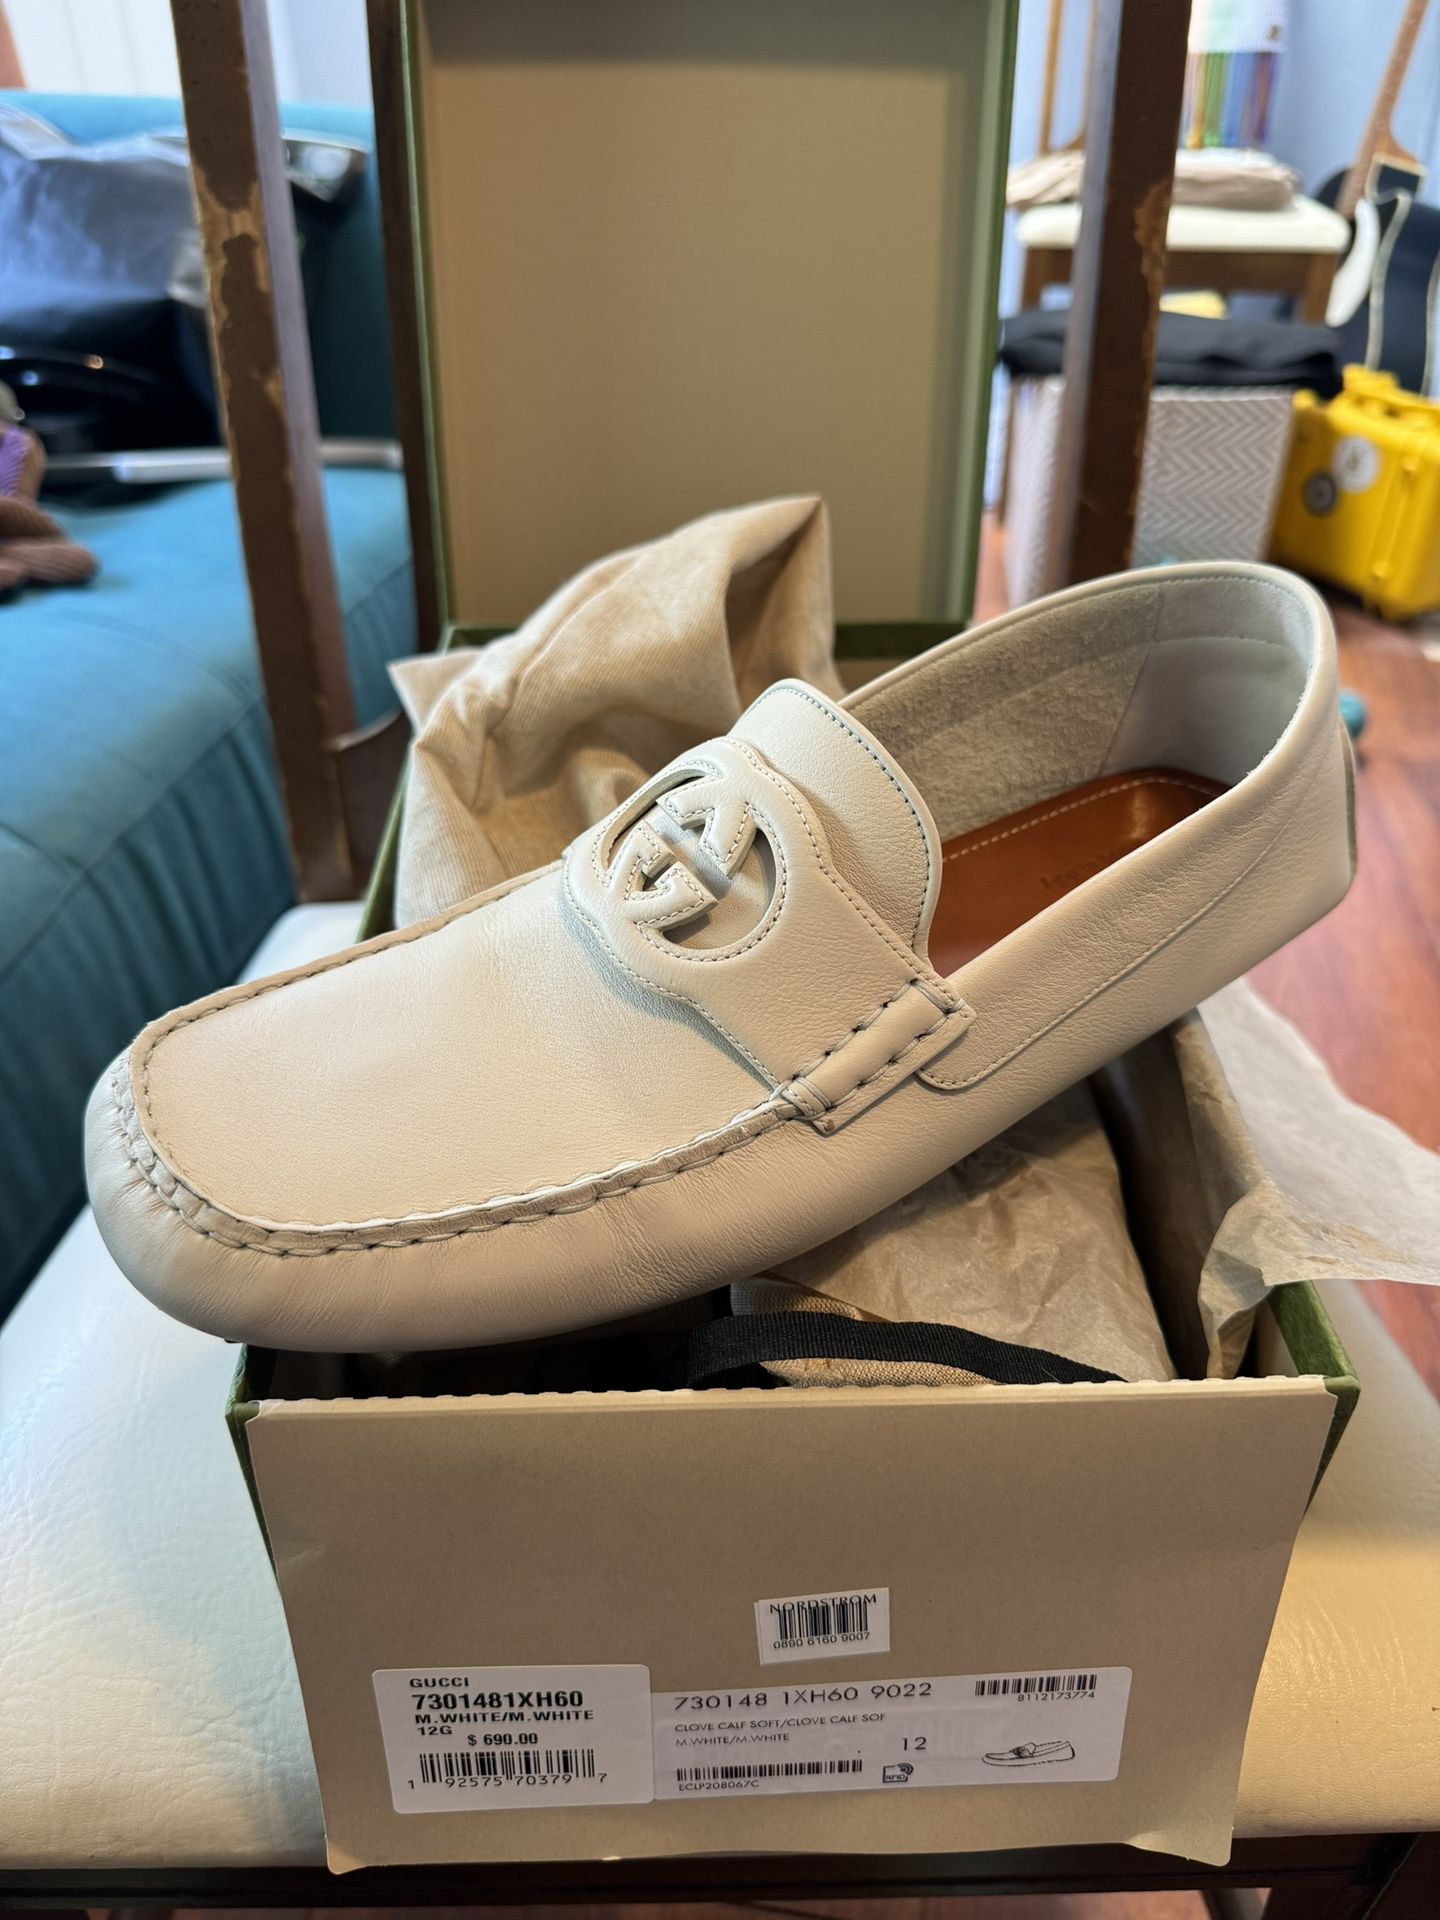 Brand New Men’s White Gucci Loafers Size 12